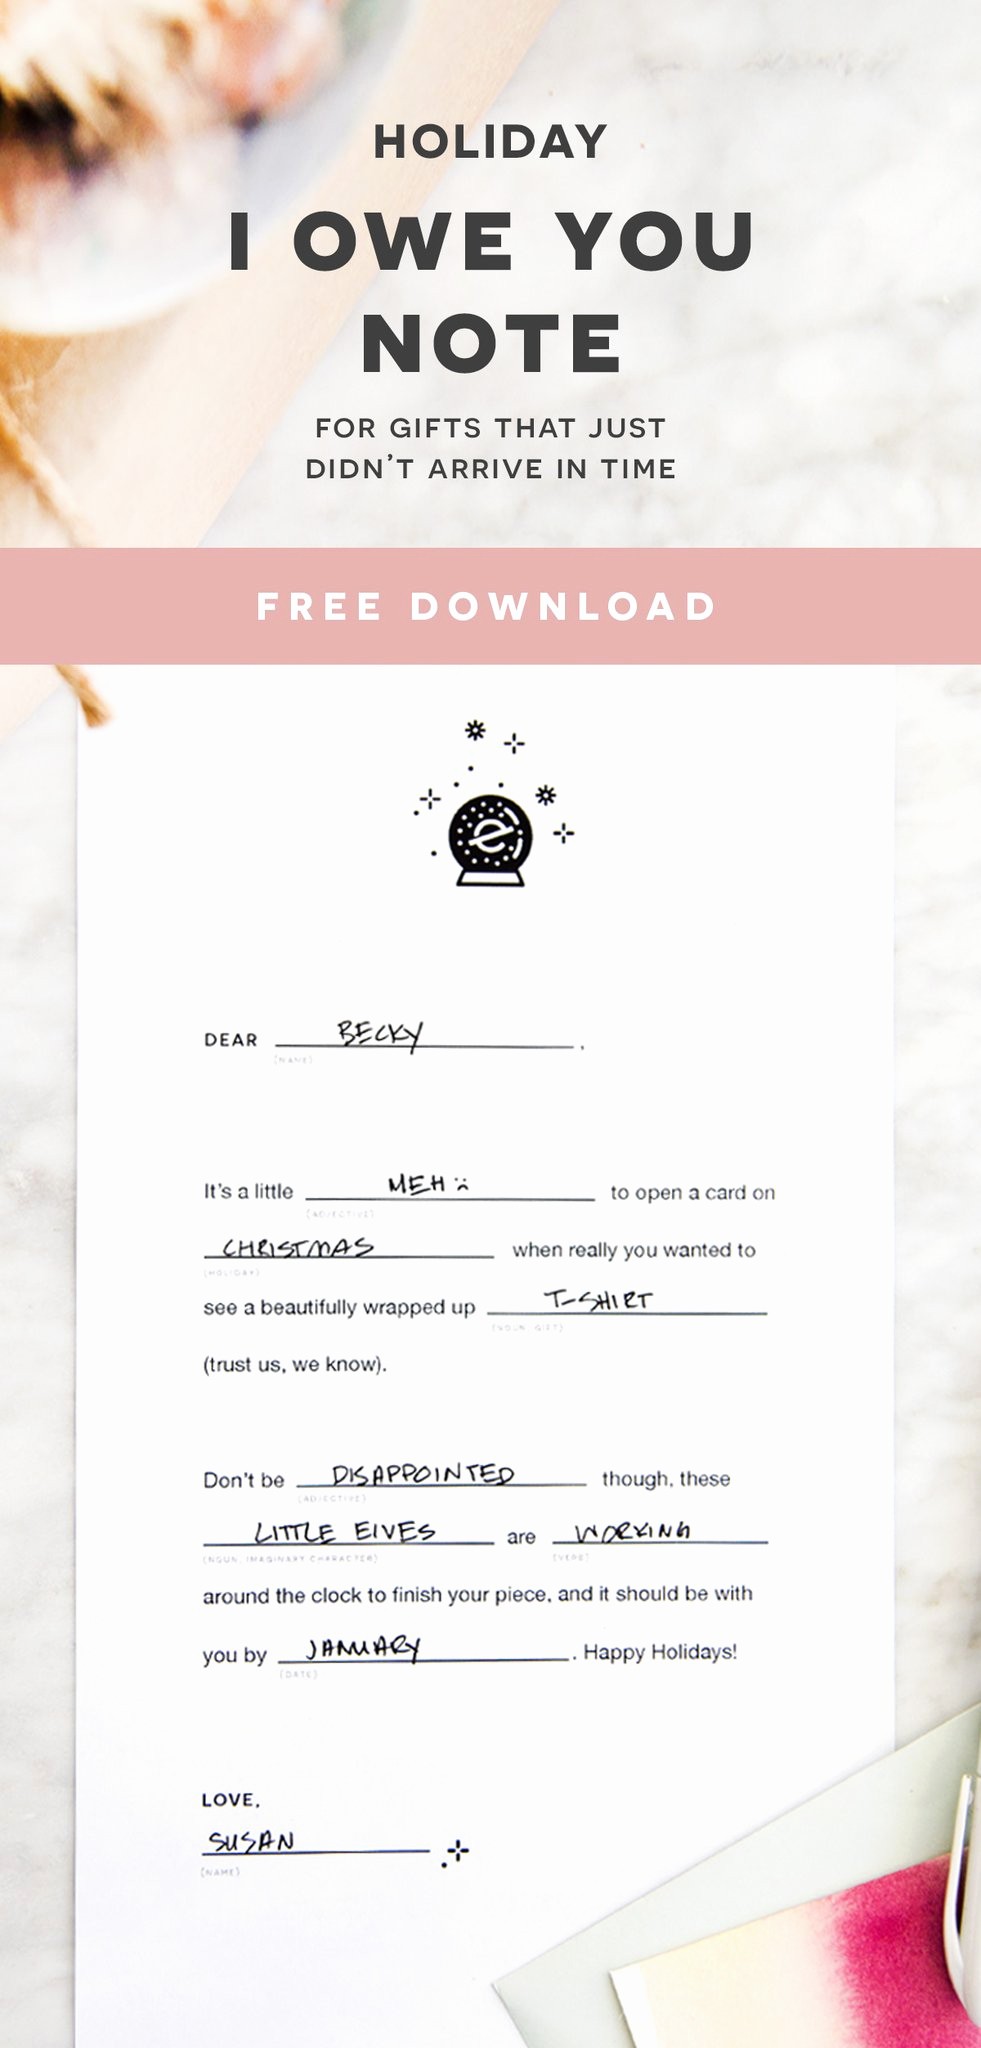 I Owe You Gift Certificate Lovely ‘i Owe You’ Note A Free Download for Gifts that Just Didn